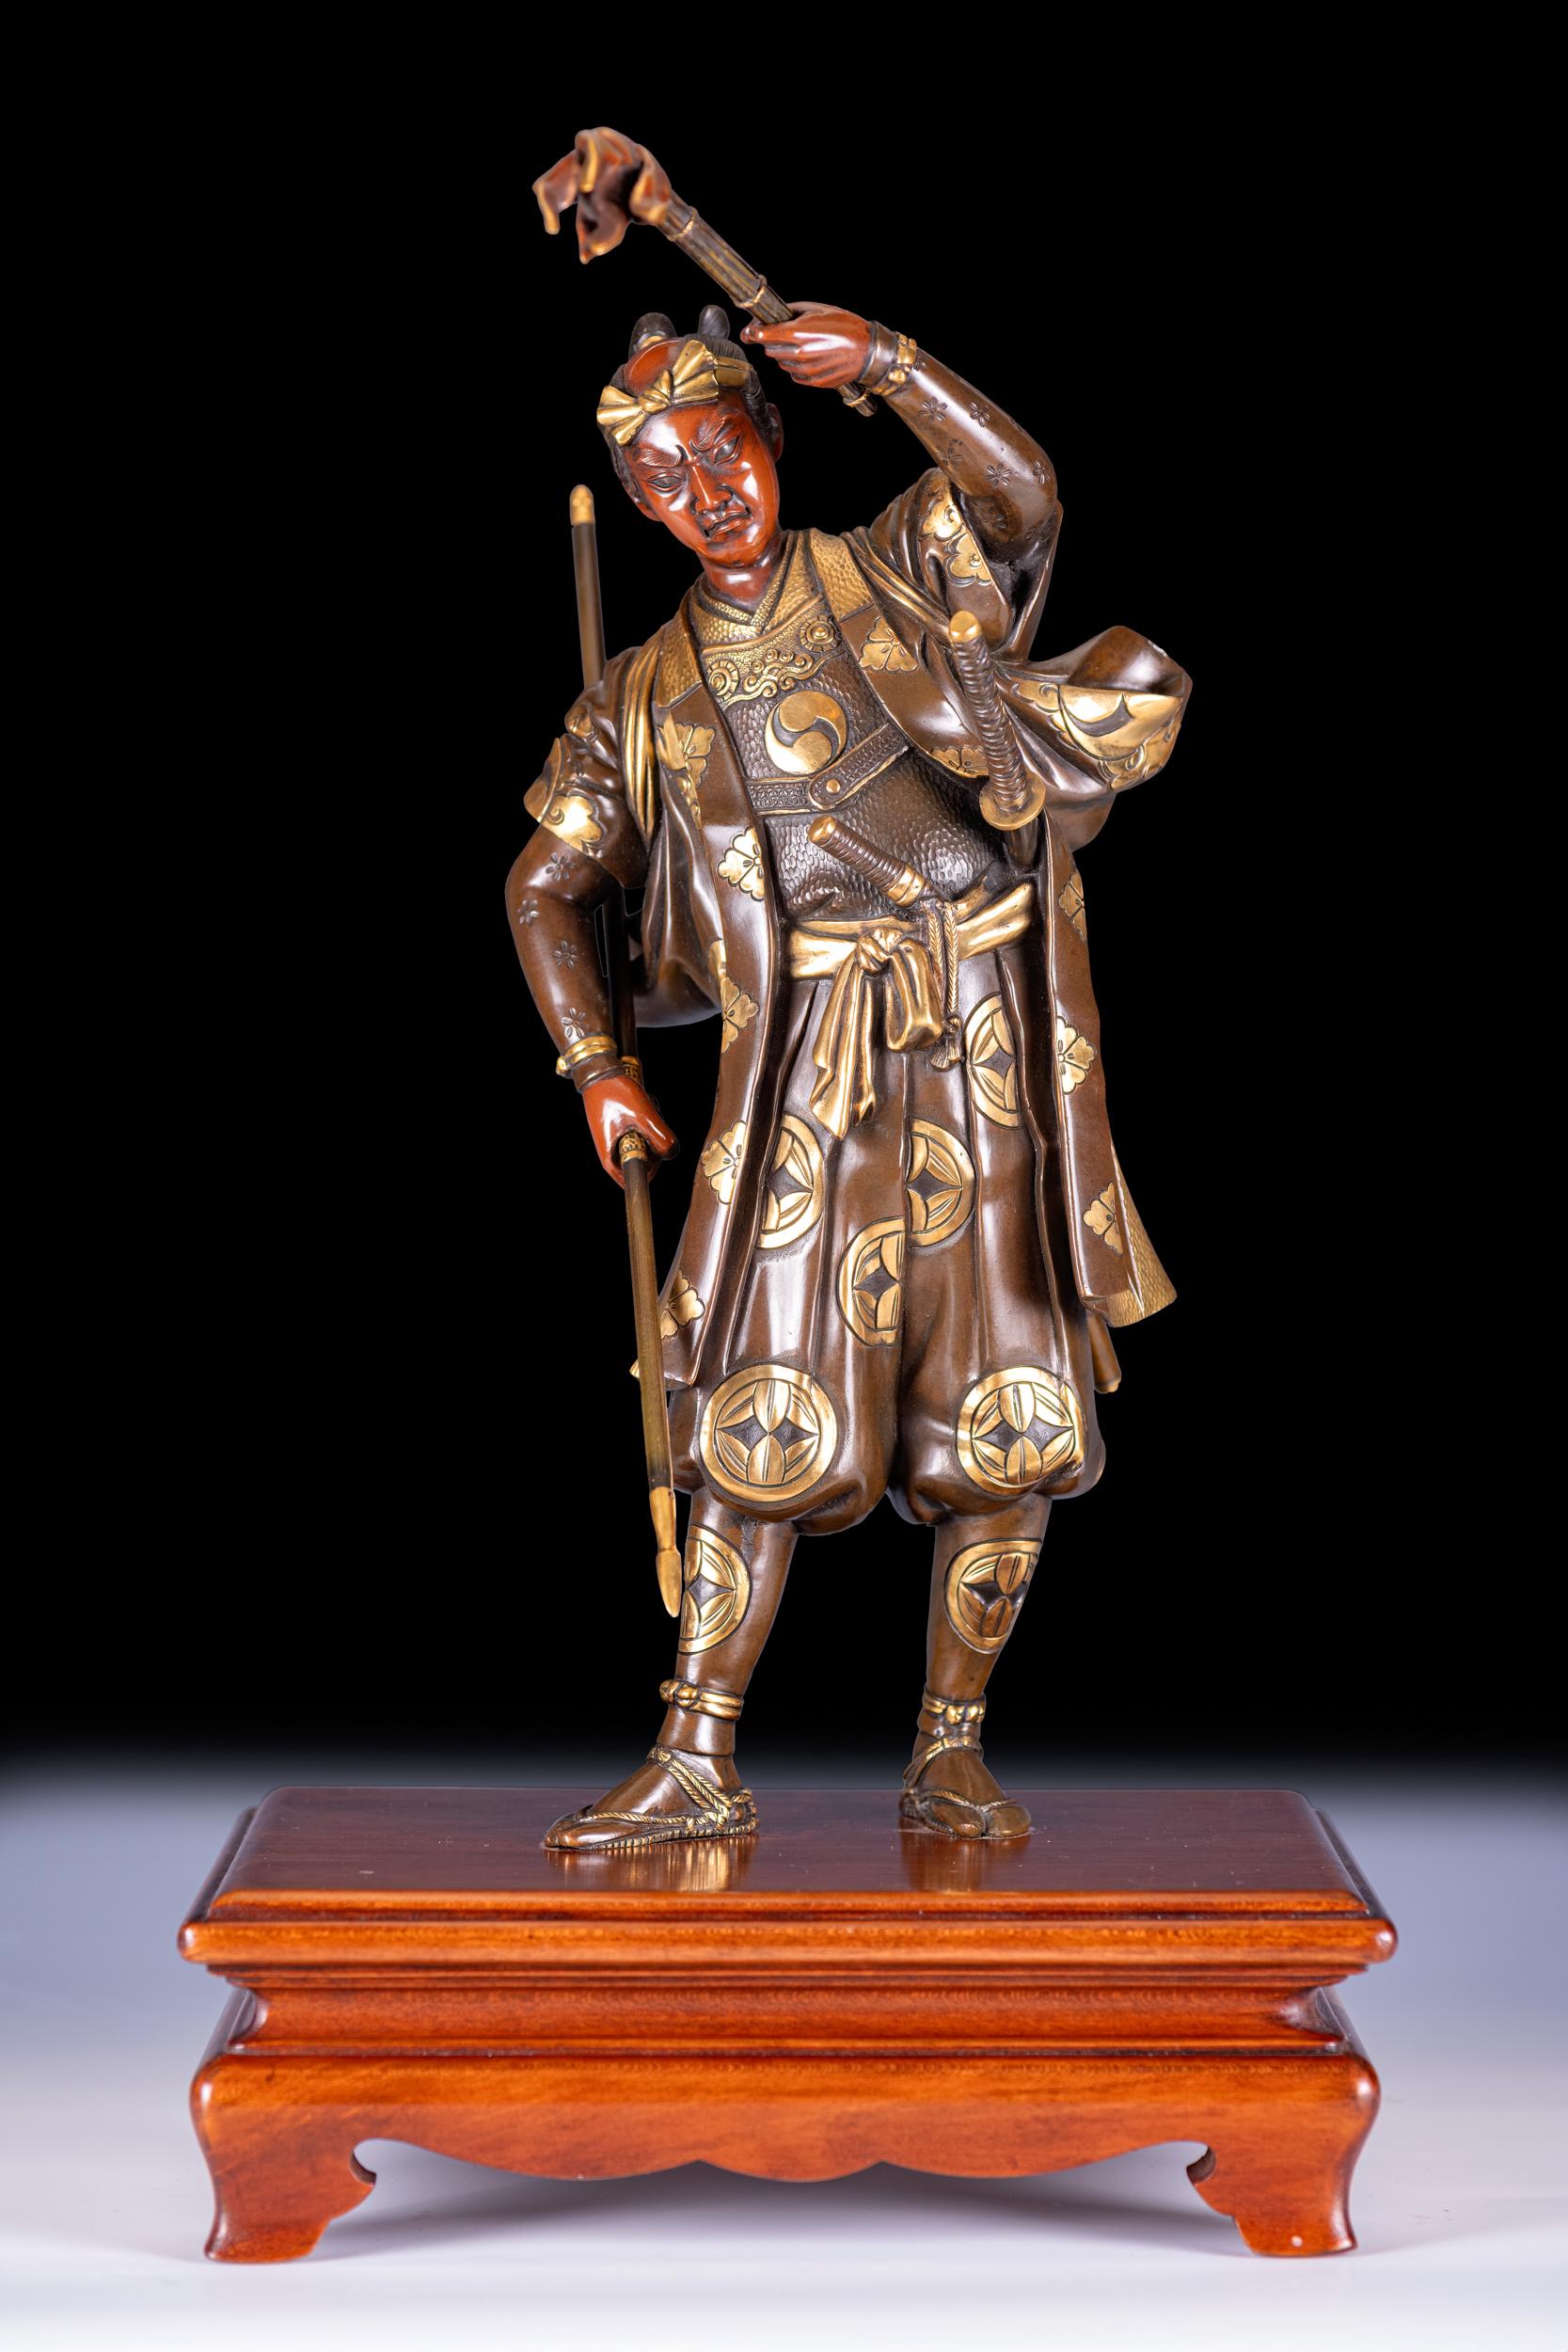 A superb Japanese bronze and gilded sculpture of a samurai warrior, Meiji period. Depicts a Japanese warrior in national dress and impetuous movement, the gilt details mon (heraldic crest) finely worked on grounds of rich brown patination; with two